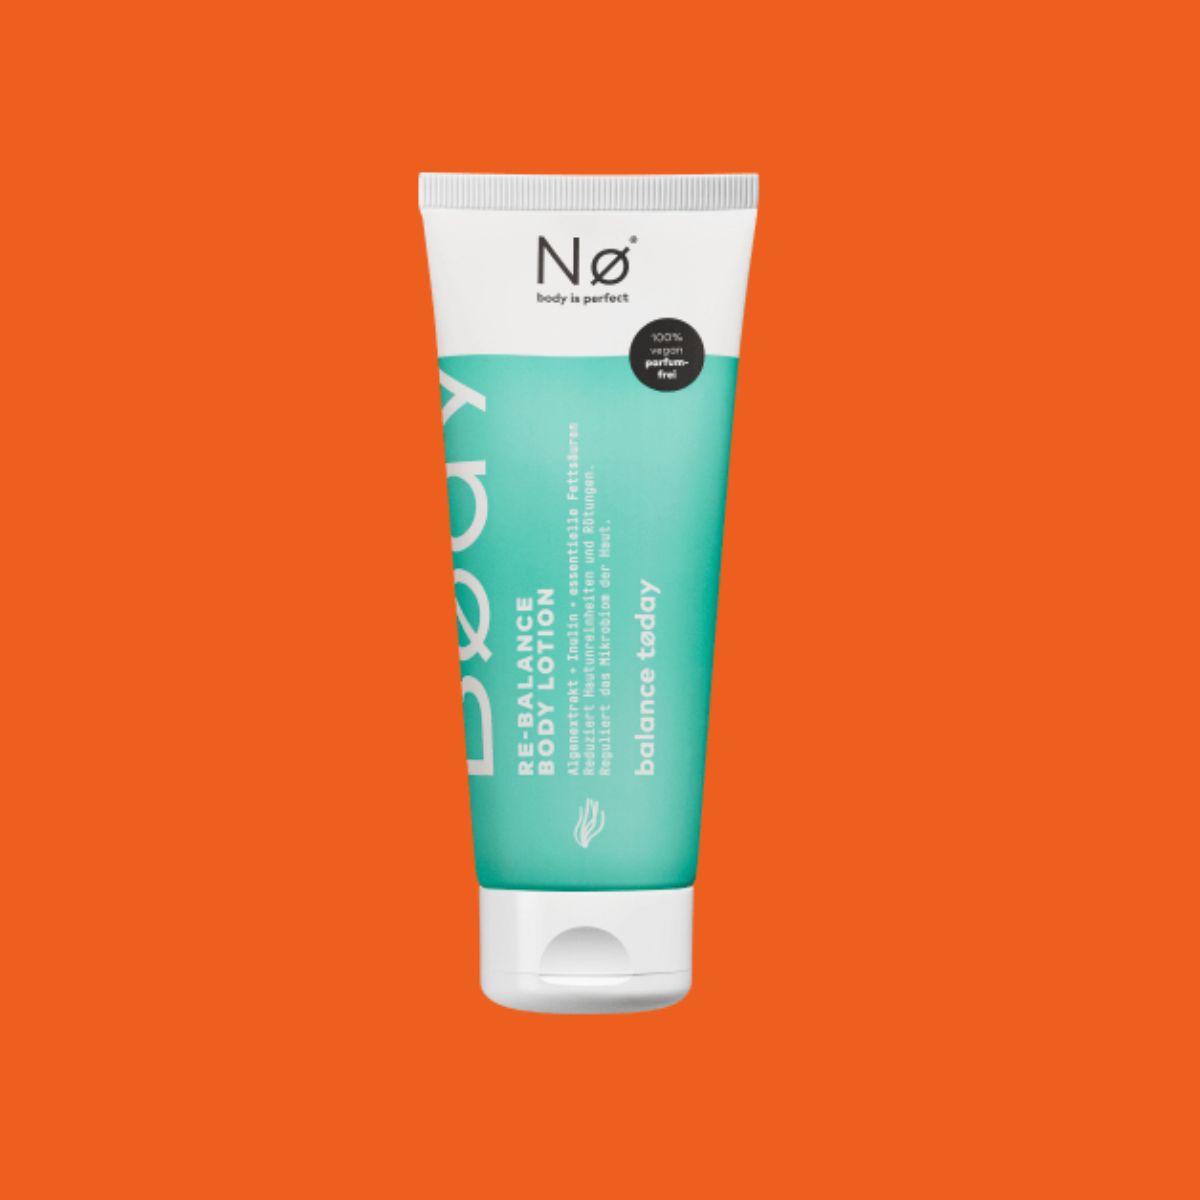 Product photo of NØ COSMETICS Body Lotion.